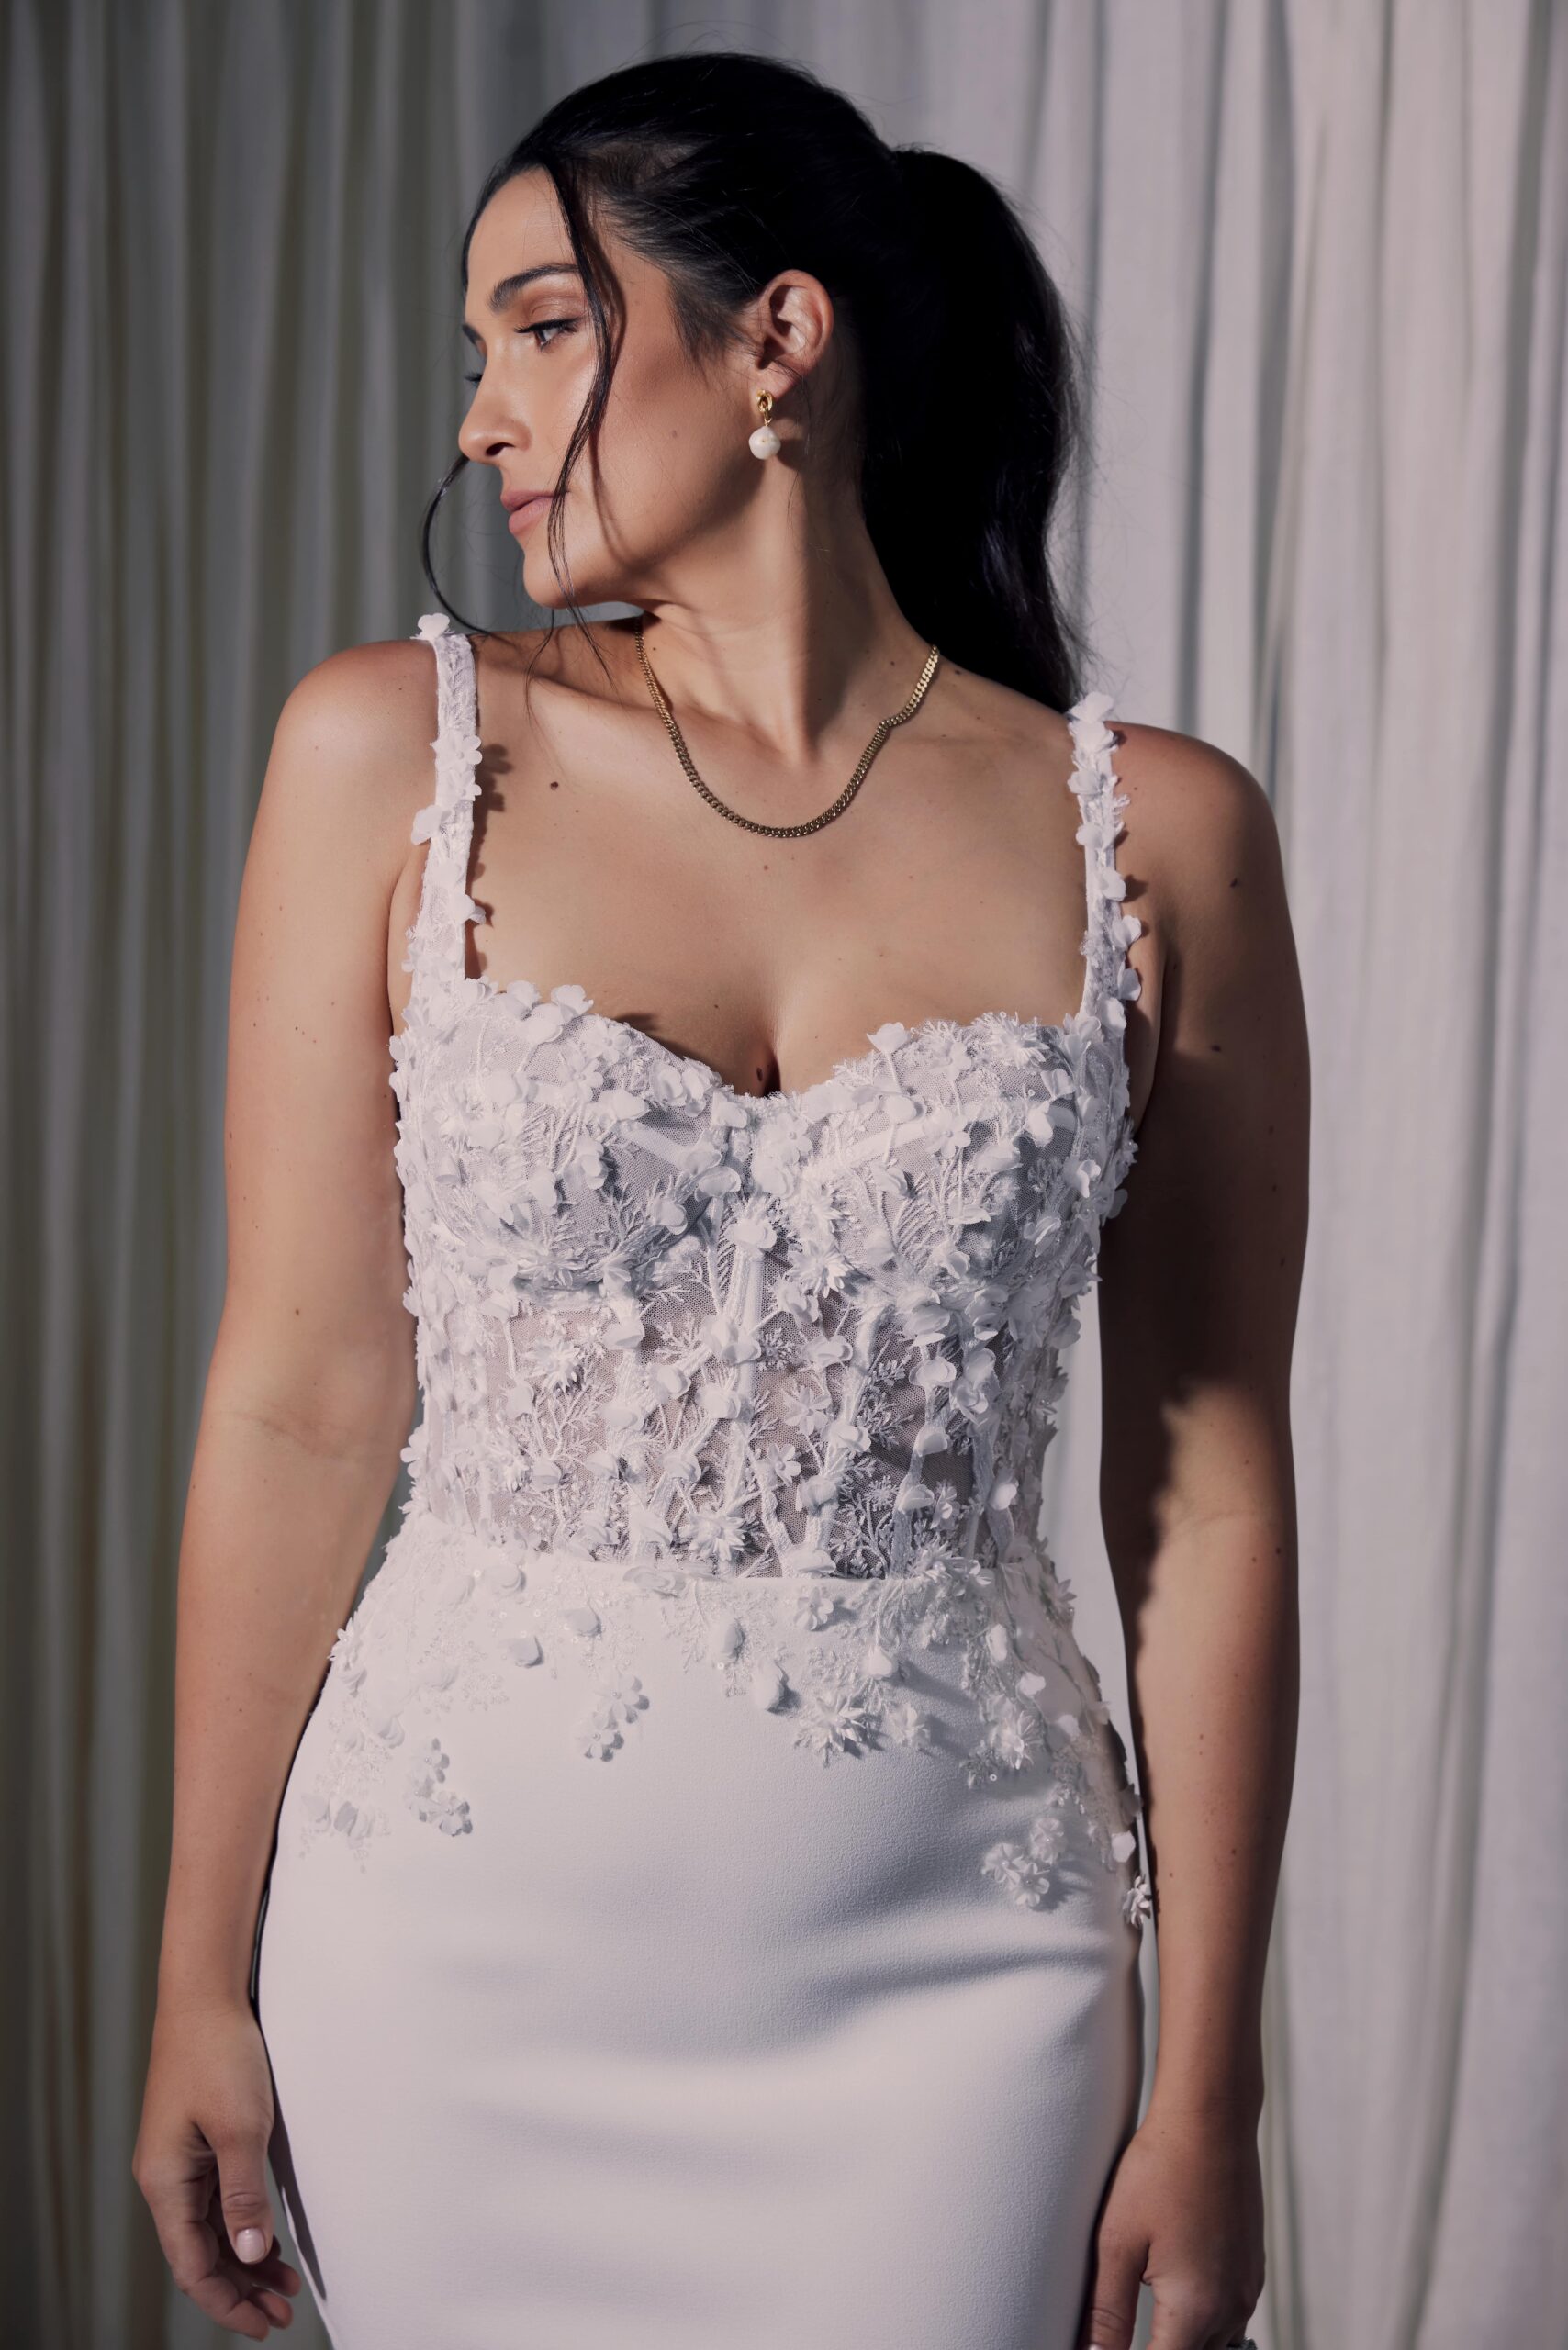 The Celena gown - a fit and flare silhouette with a sculpted sheer bodice with exposed boning and 3D lace.